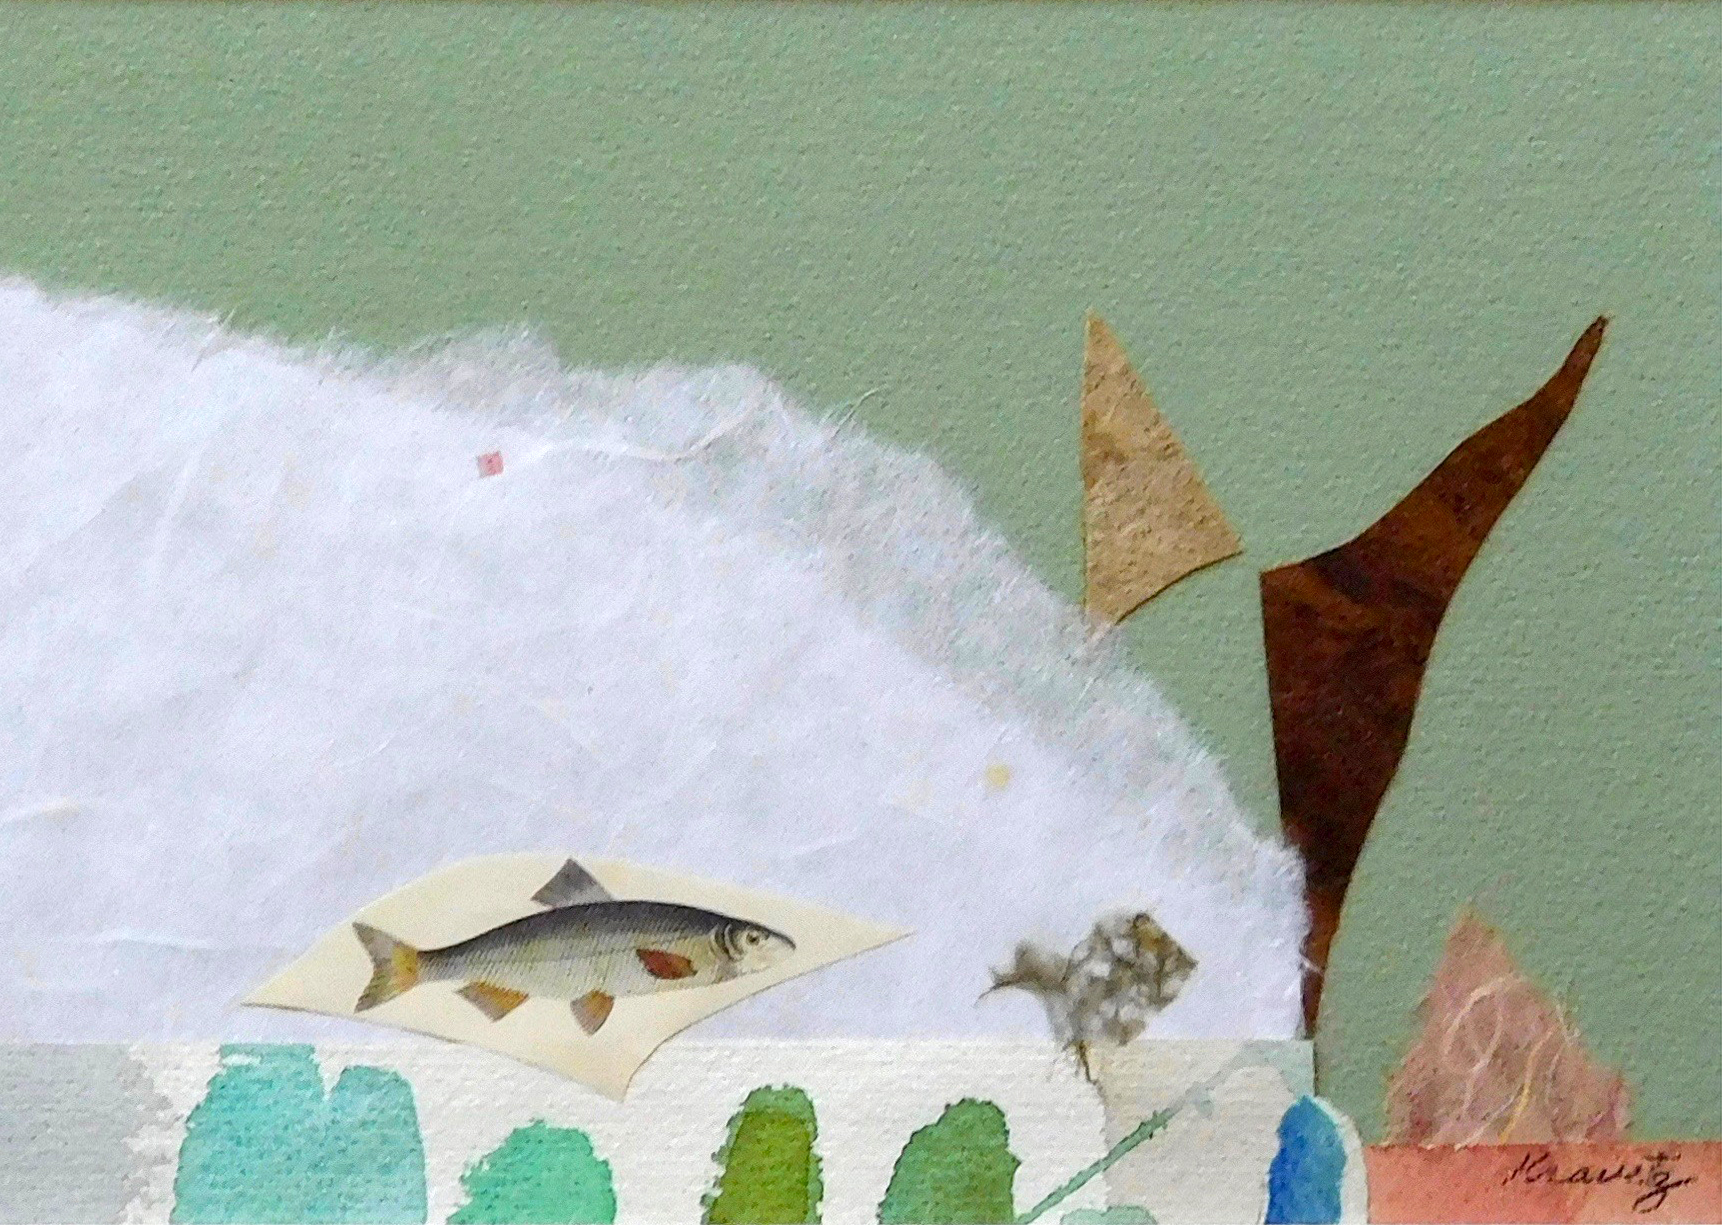 Under Water Seascape, 1995, Collage with Handmade Paper, 14x16 inches with mat